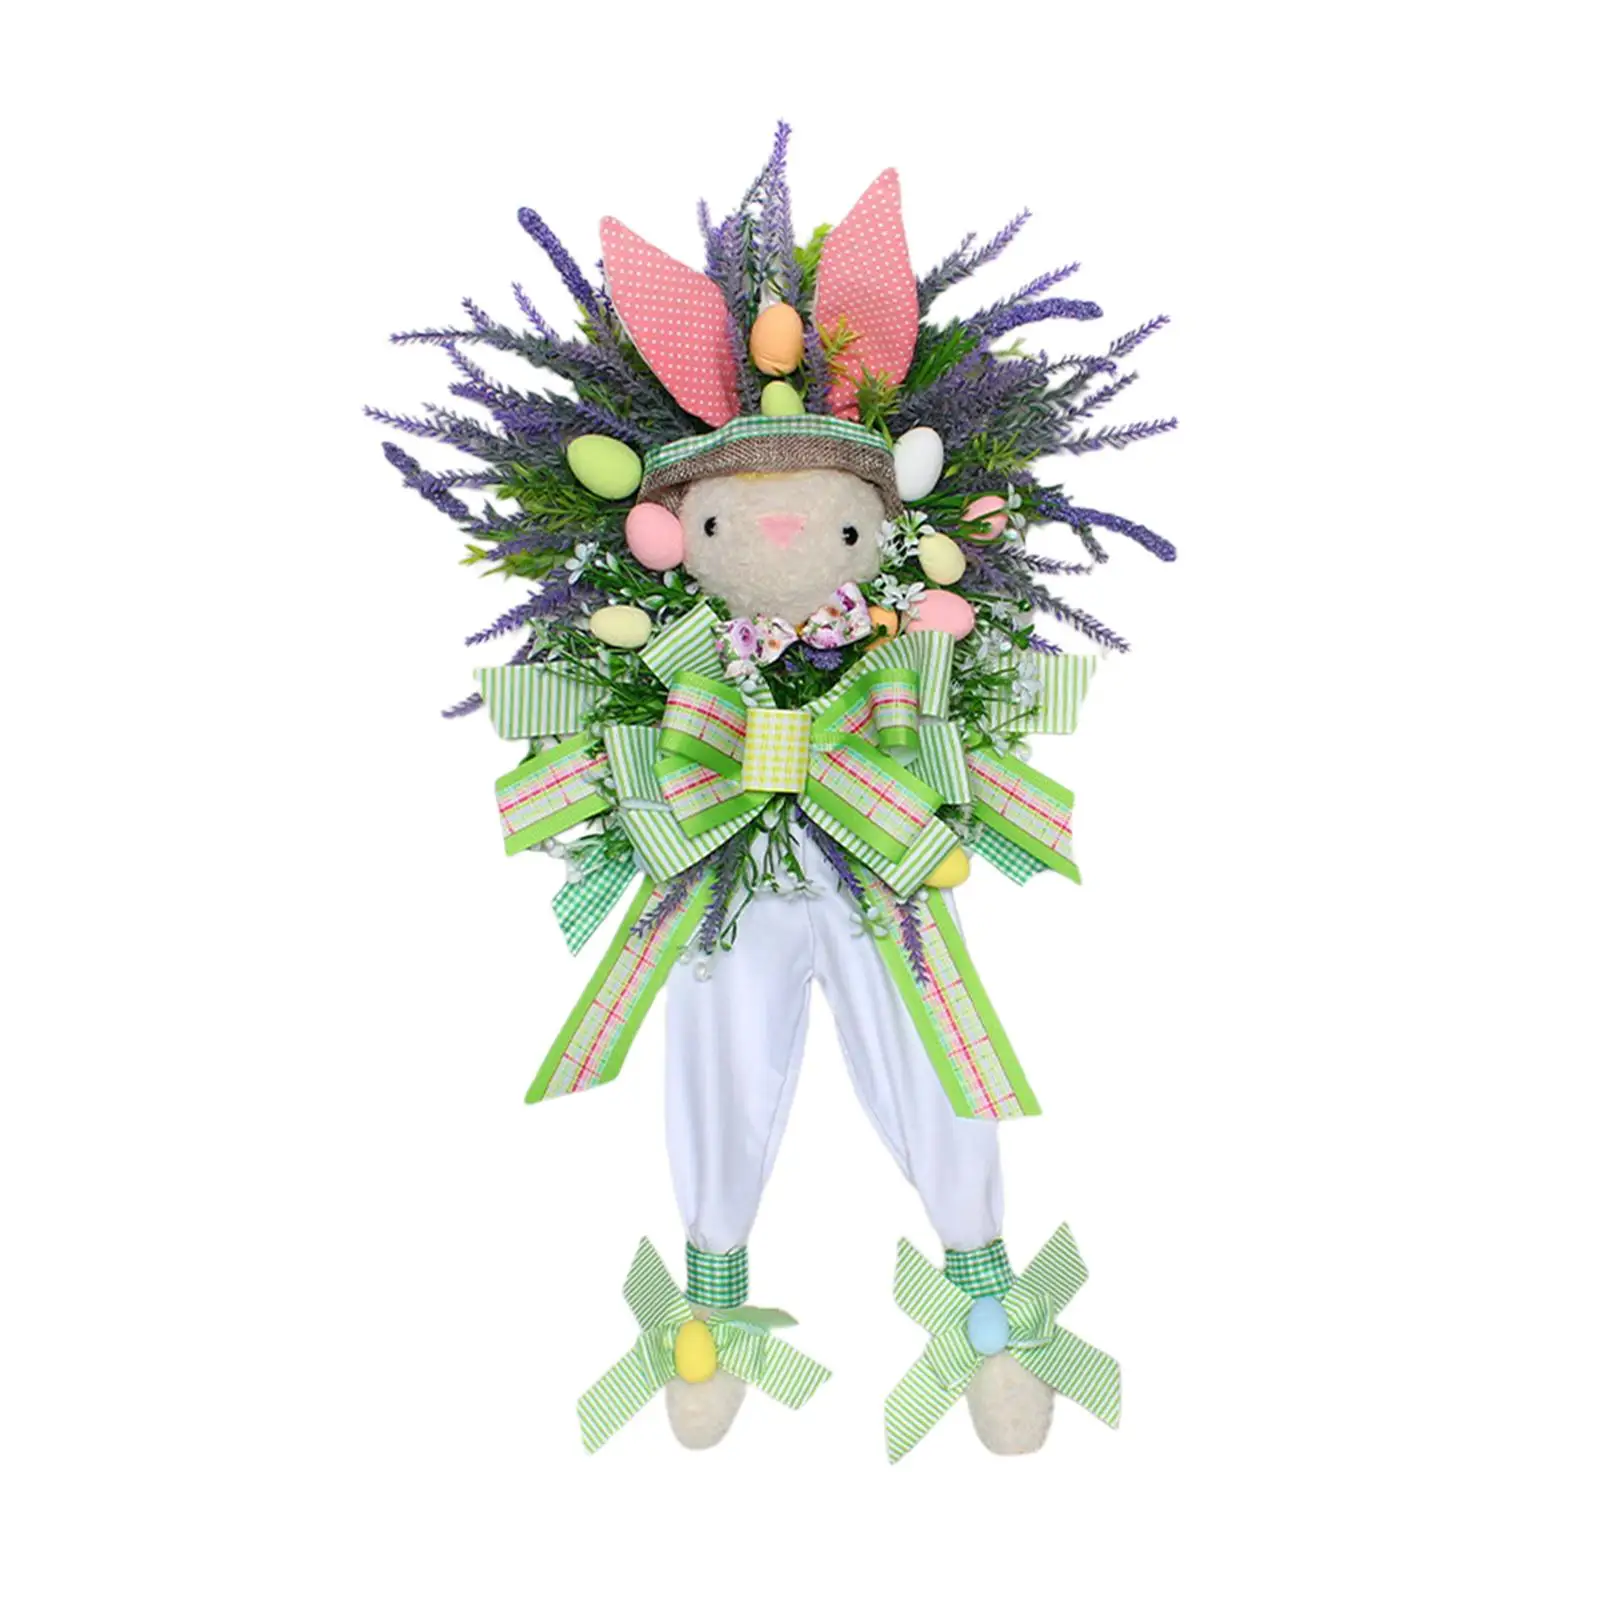 Easter Rabbit Egg Wreath Front Door with Colorful Eggs Greenery Leaves Bunny Garland for Home Outdoor Decor